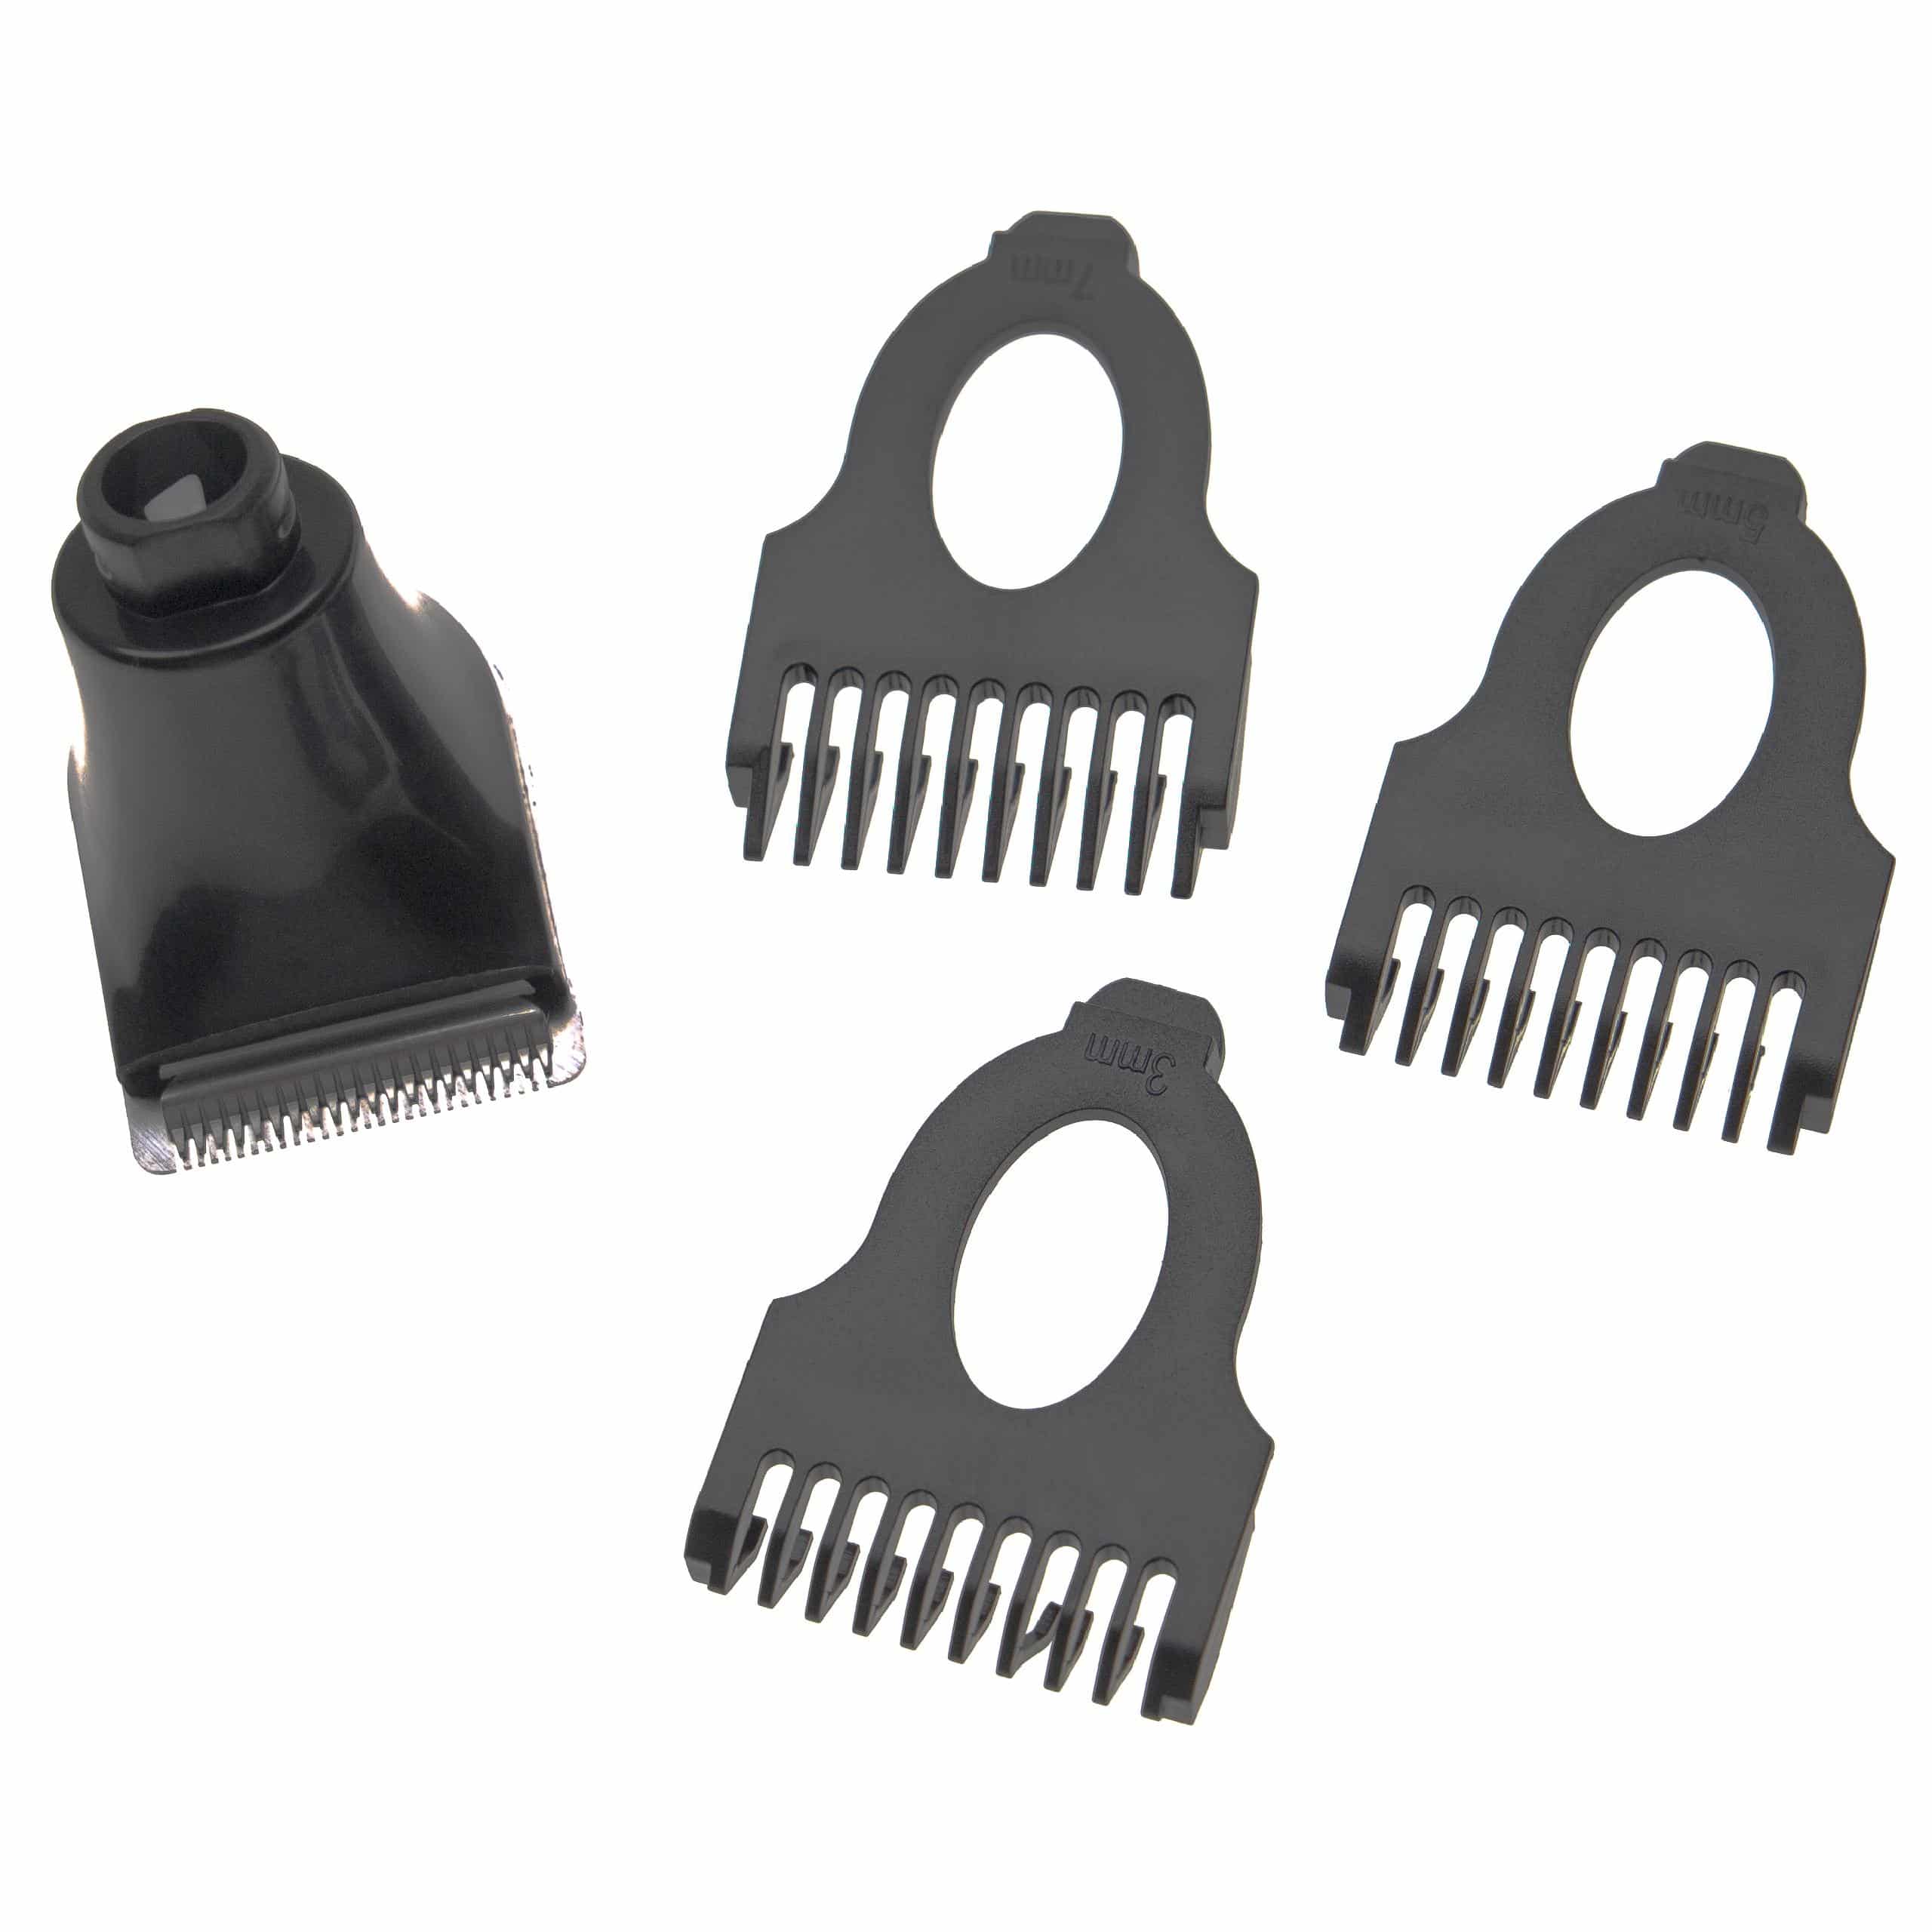 Trimmer Head Set for Philips Arcitec Razors etc. - 4-Part Kit with 3 mm / 5 mm / 7 mm Beard Comb